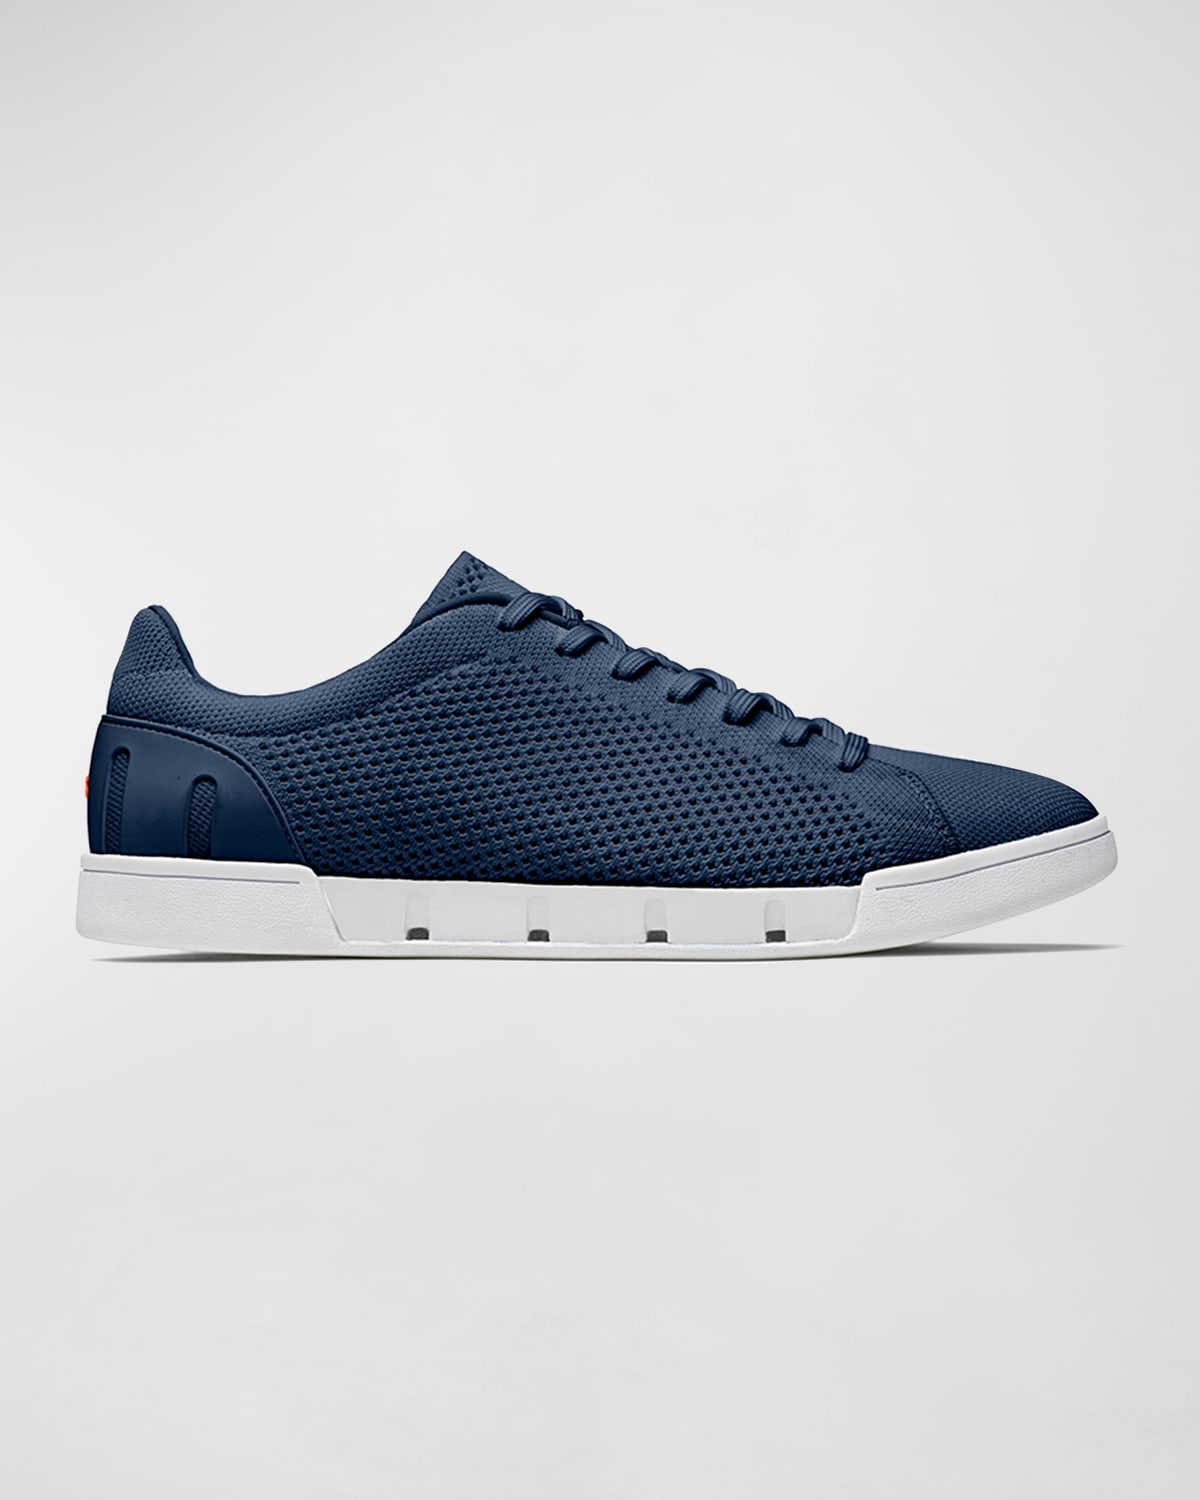 Swims Men's Breeze Knit Trainer Sneakers In Navy/white